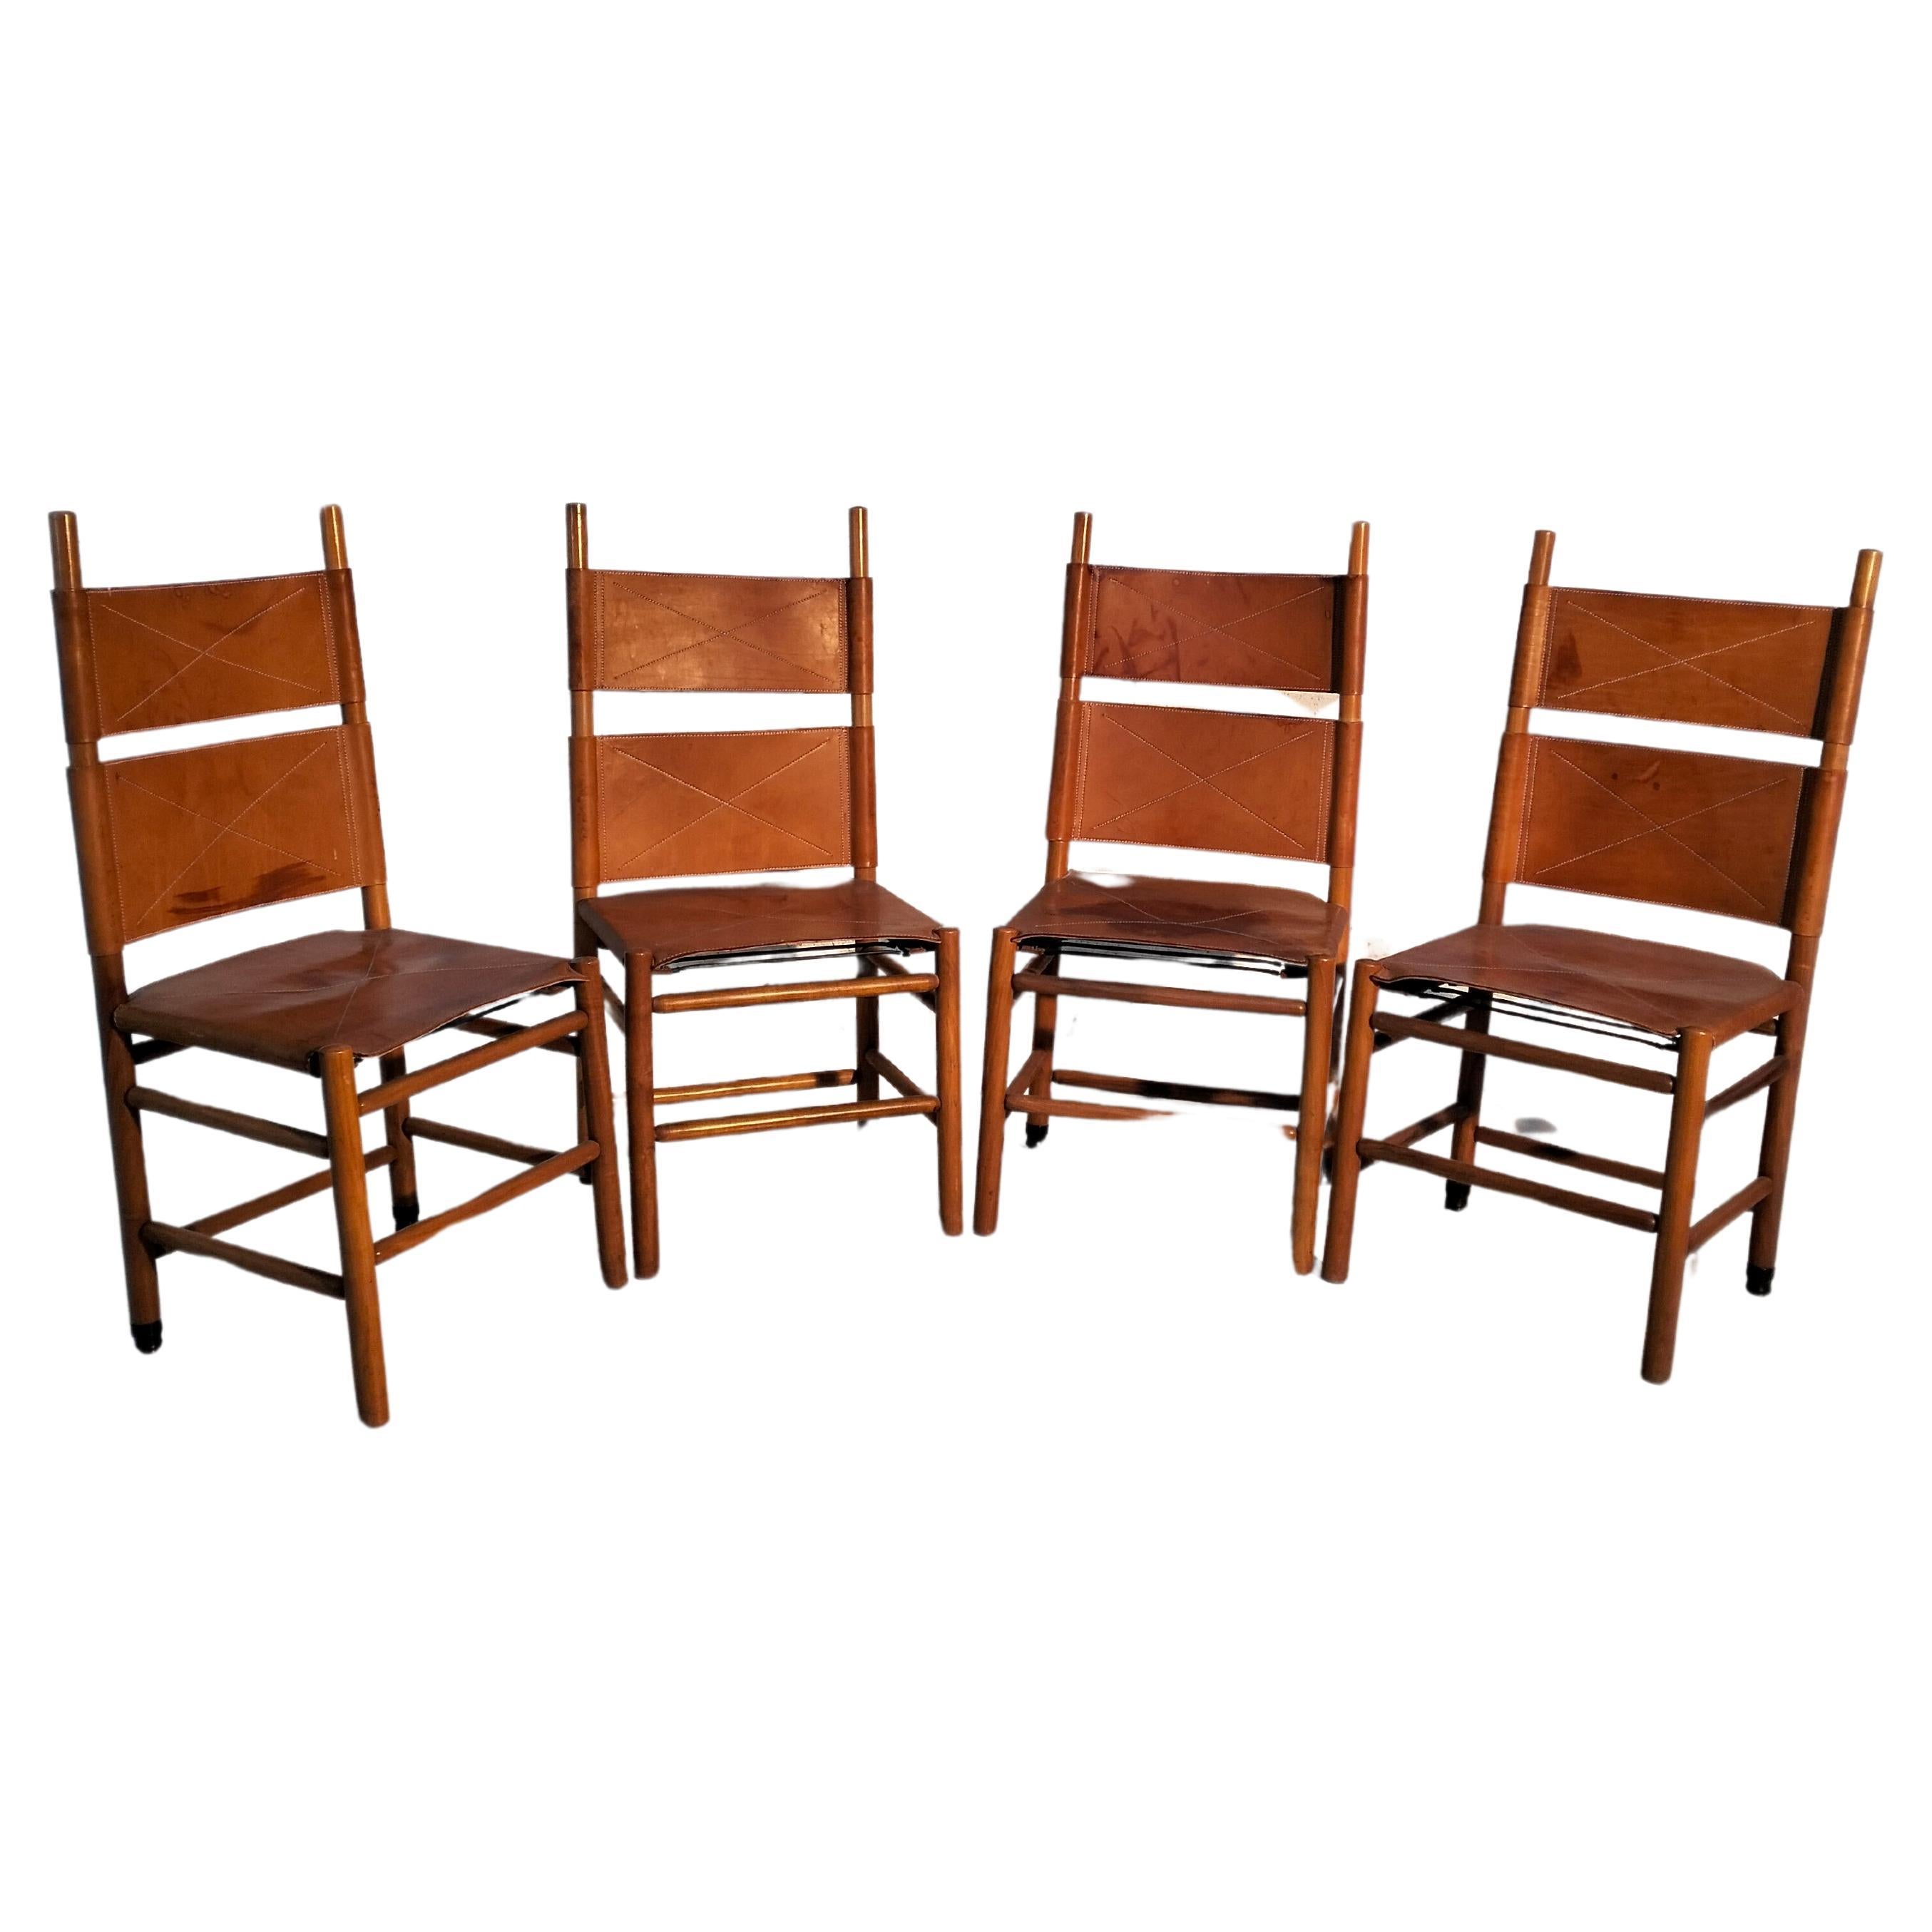 Set of 4 chairs  “Kentucky” model by Carlo Scarpa  for Bernini 70s, 80s